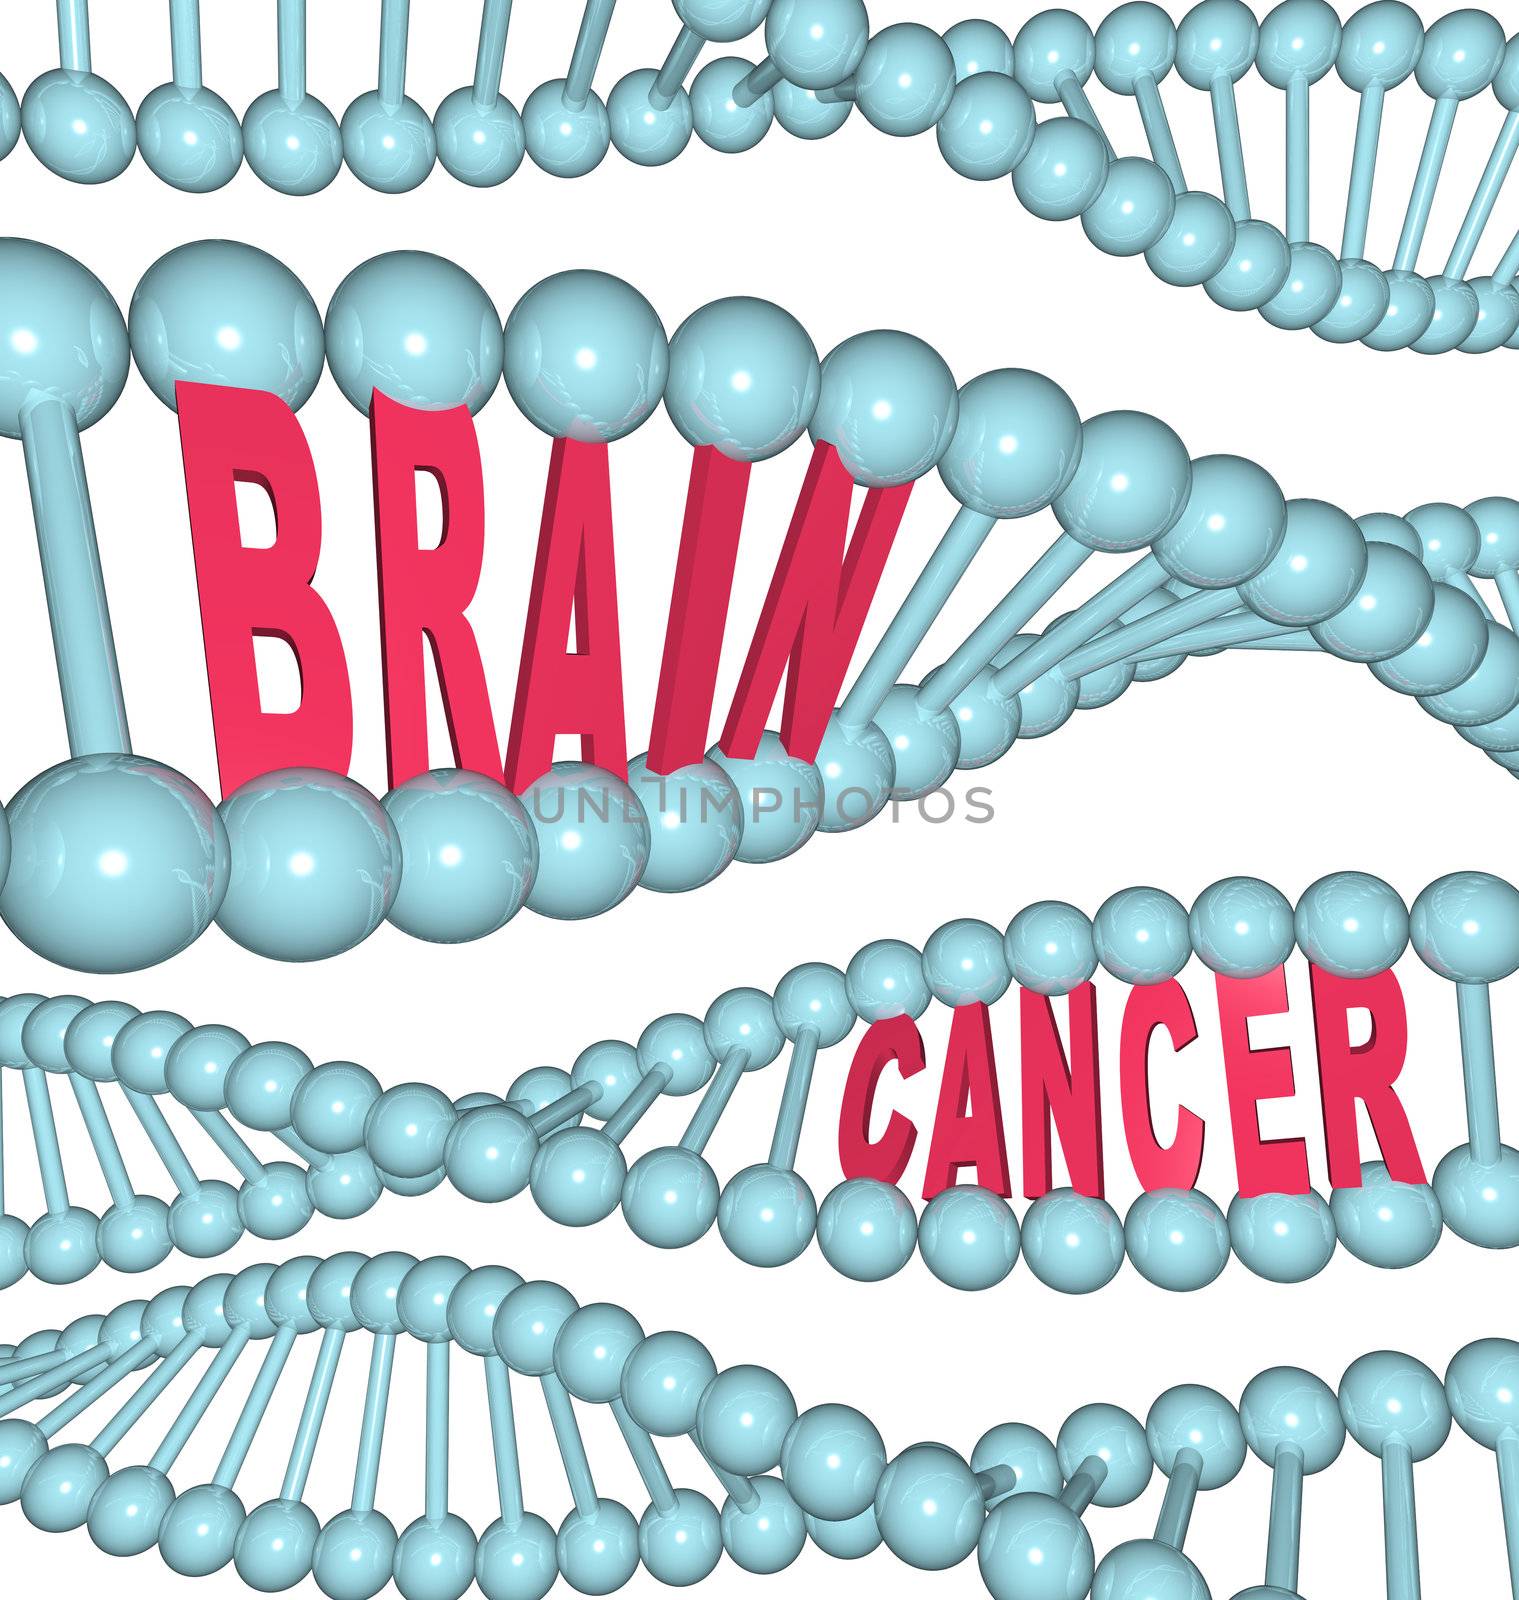 Brain Cancer Words in DNA Strand by iQoncept